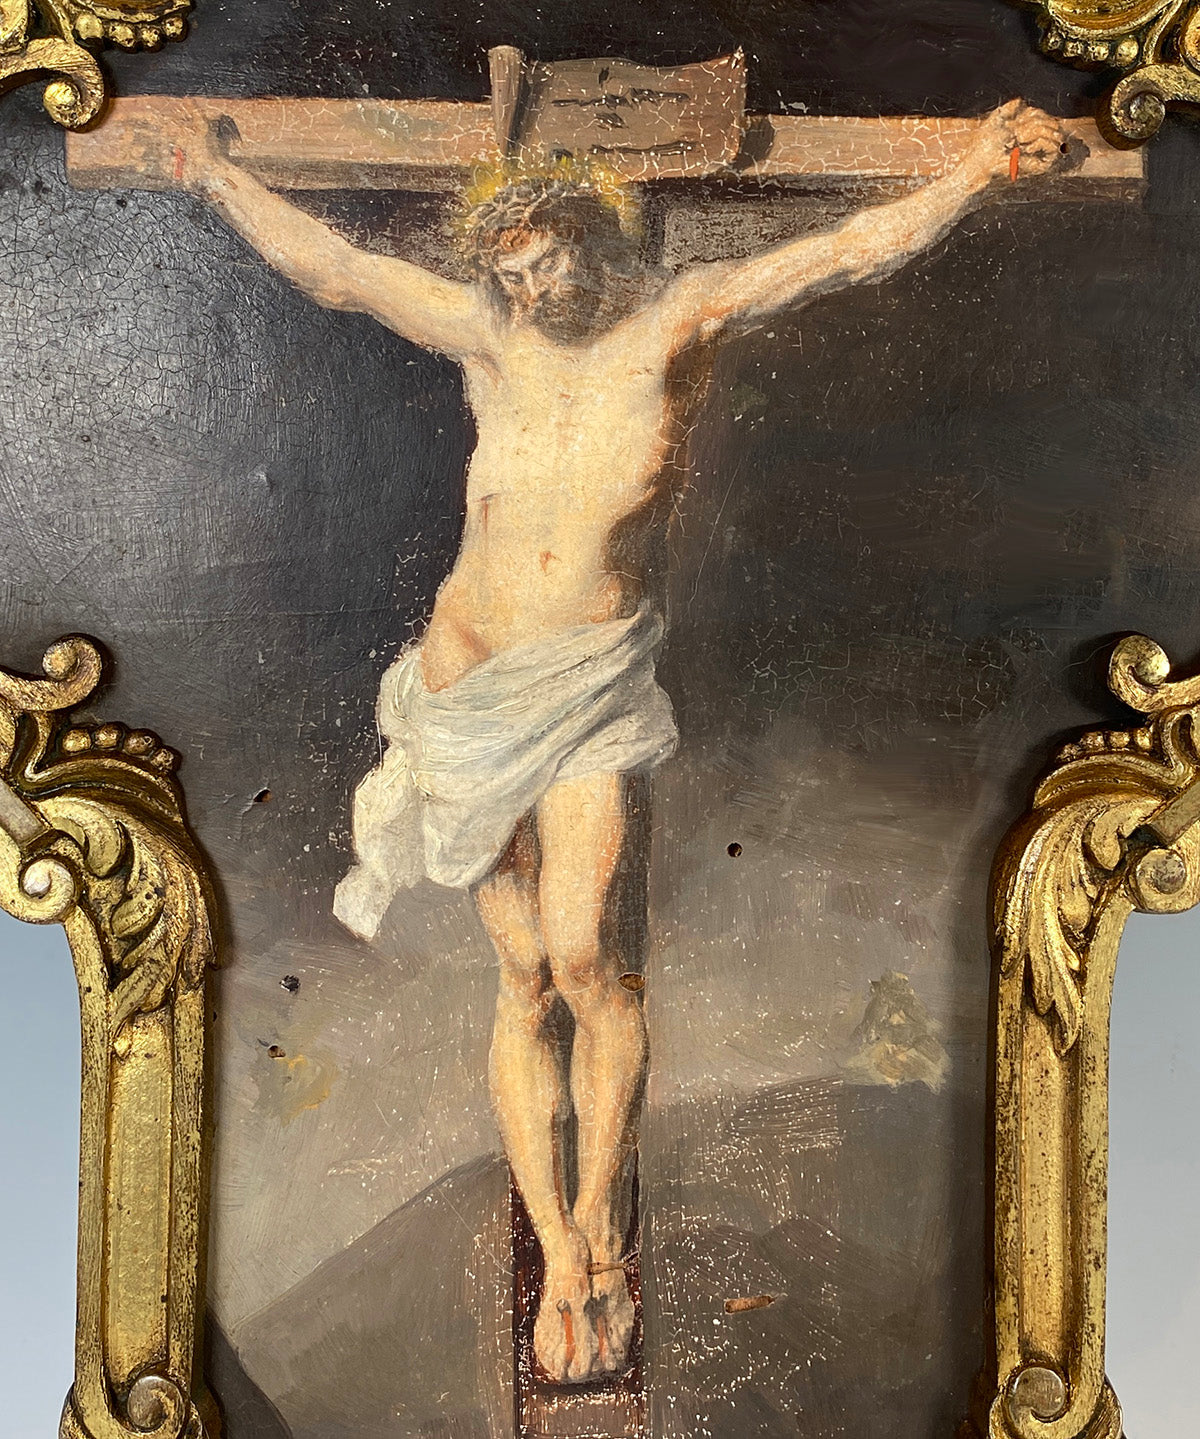 Superb Antique French Oil Painting Portrait, Christ on Cross, Crucifix in Elaborate Bronze Frame